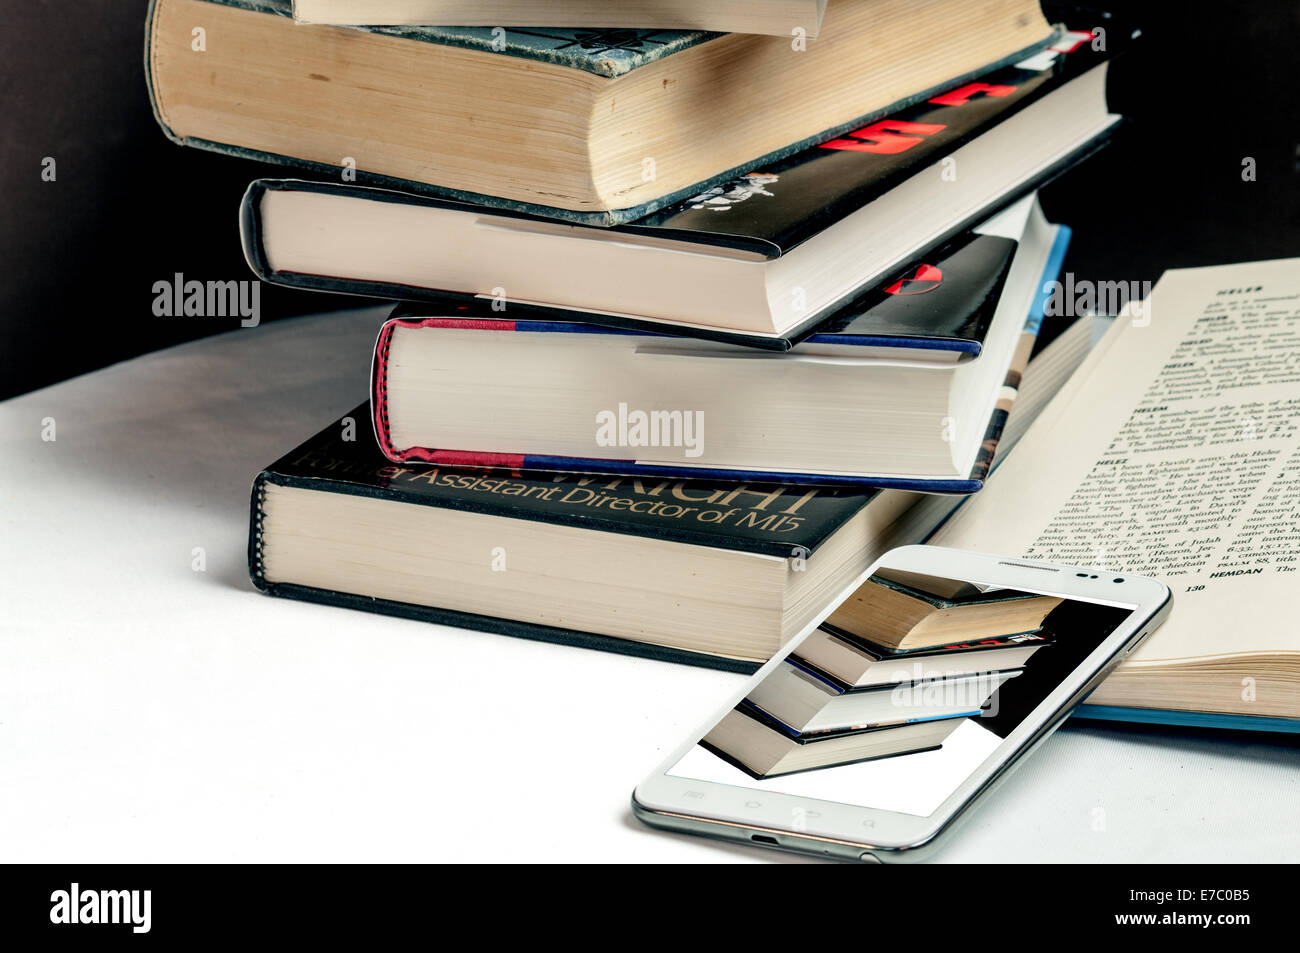 Smart-phone and books demonstrating changes in technology Stock Photo